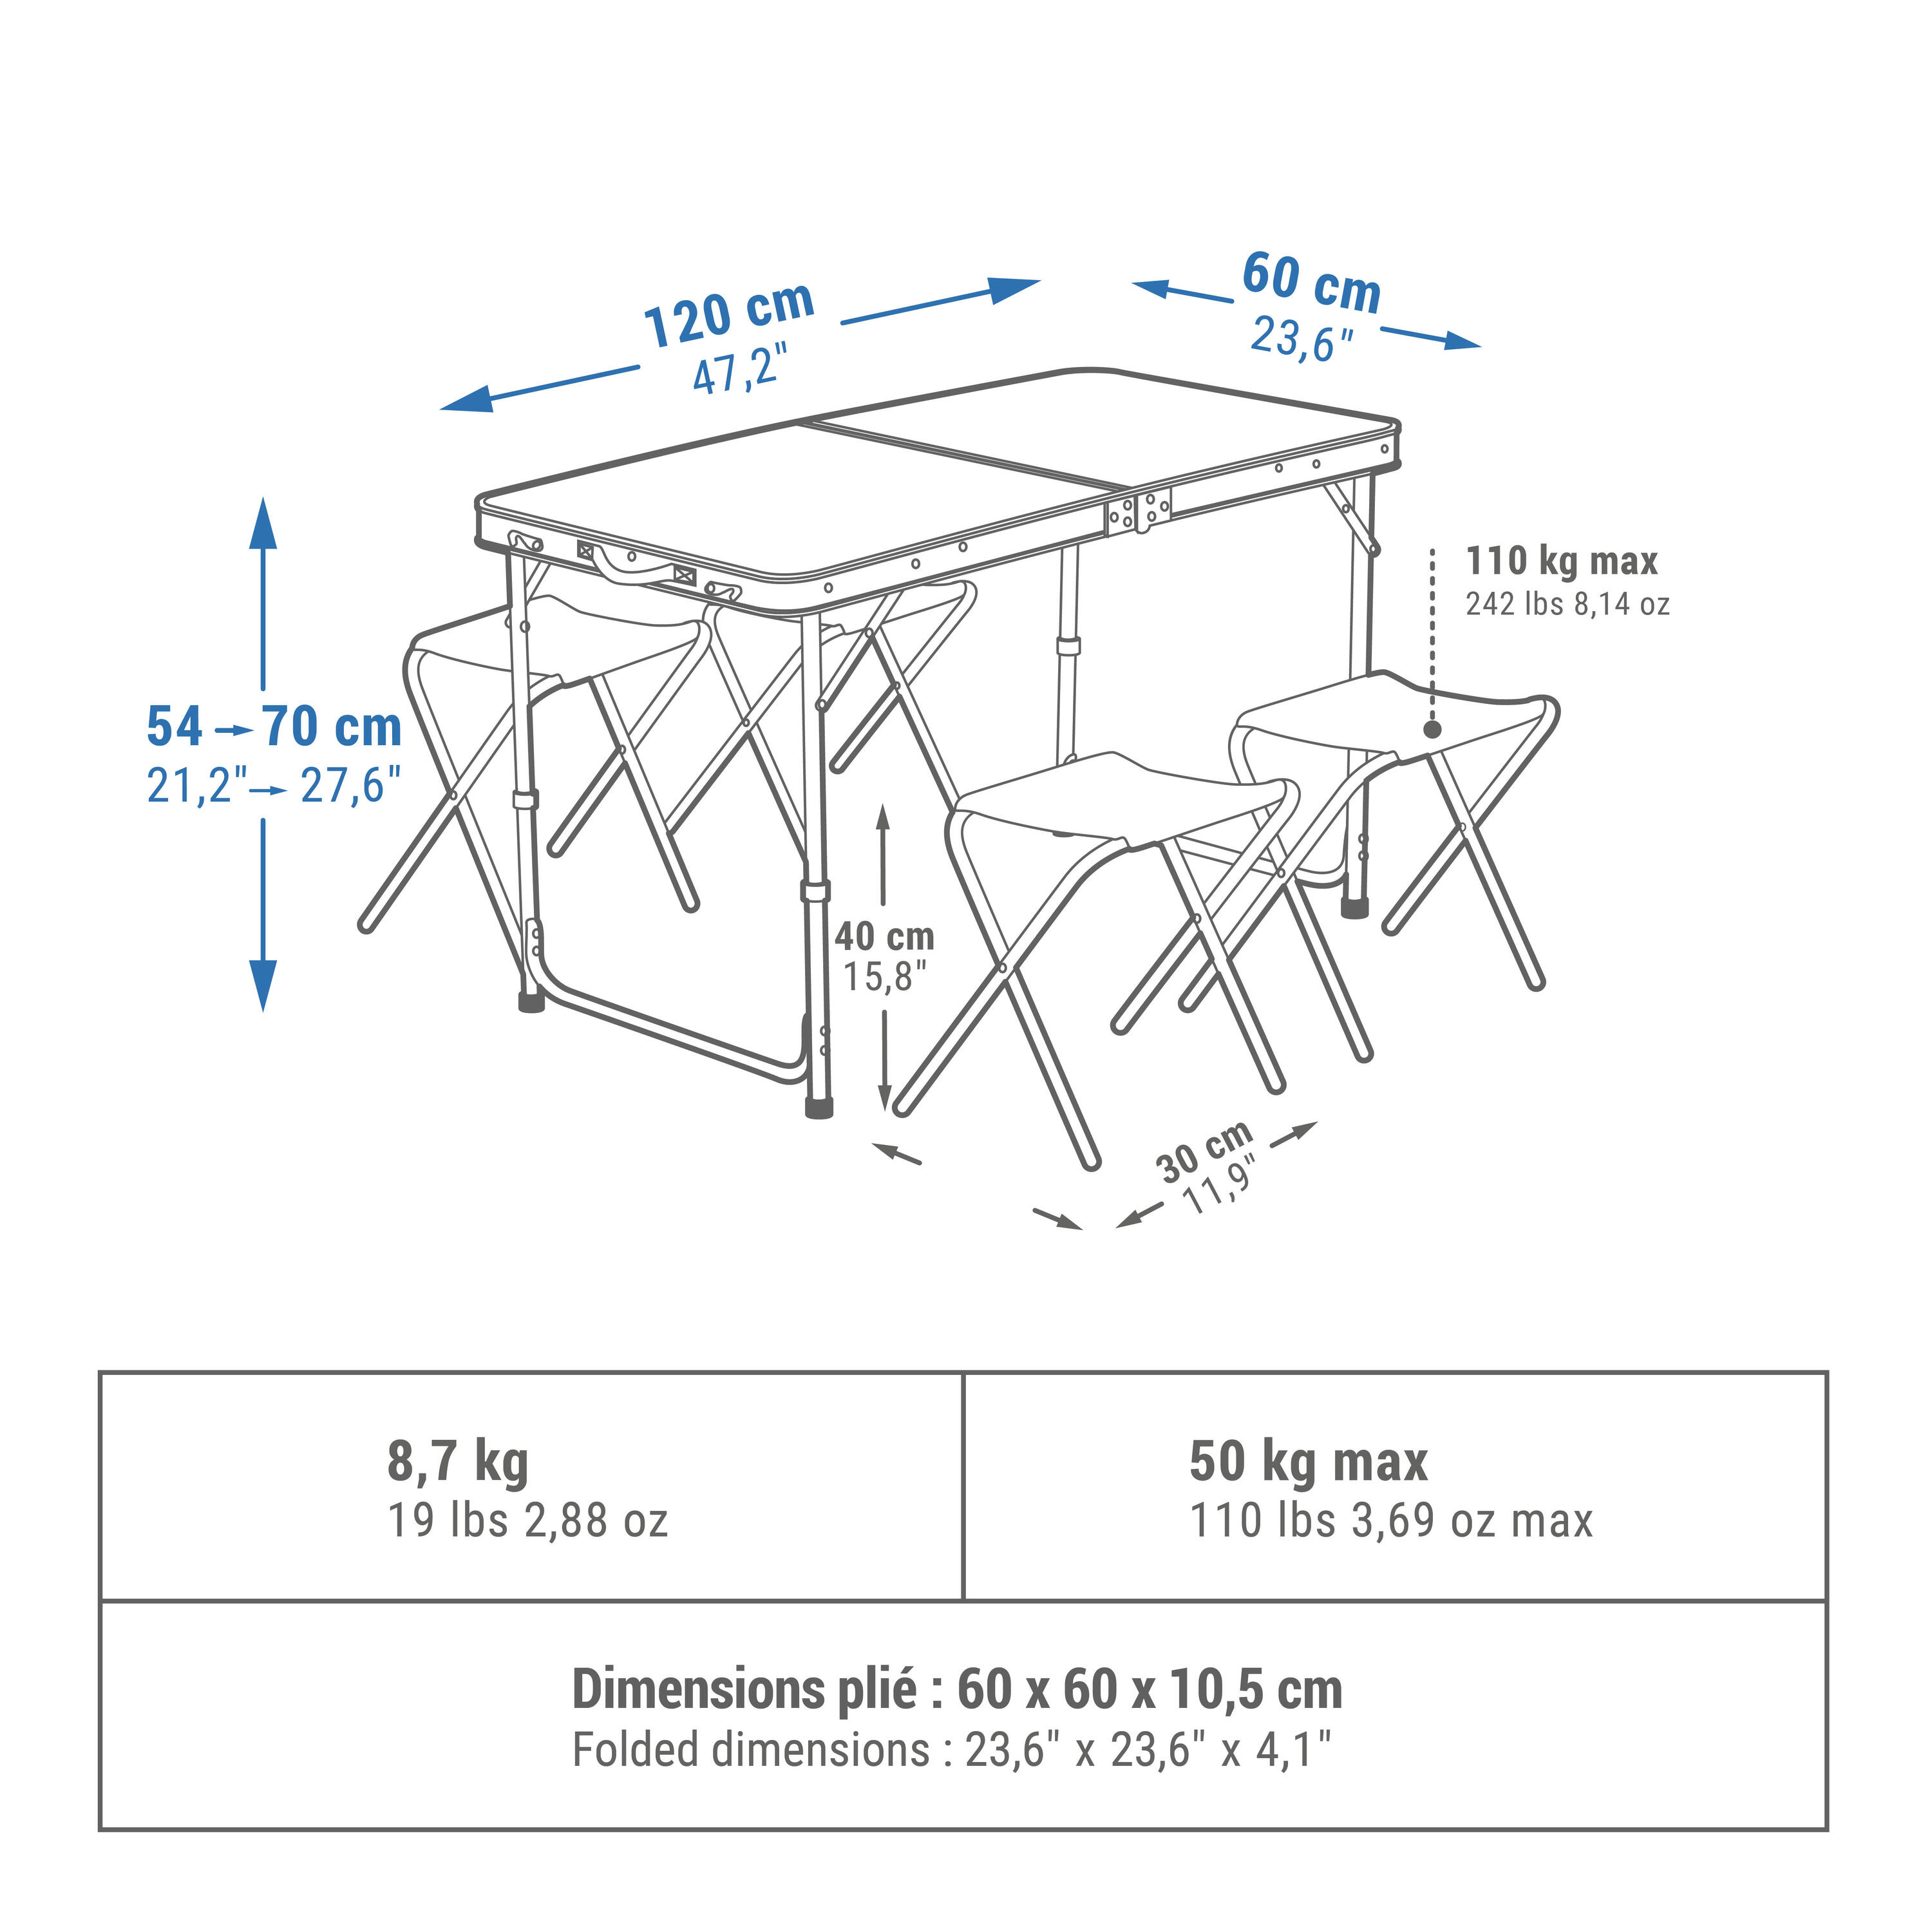 FOLDING CAMPING TABLE - 4 STOOLS - 4 TO 6 PEOPLE 2/11